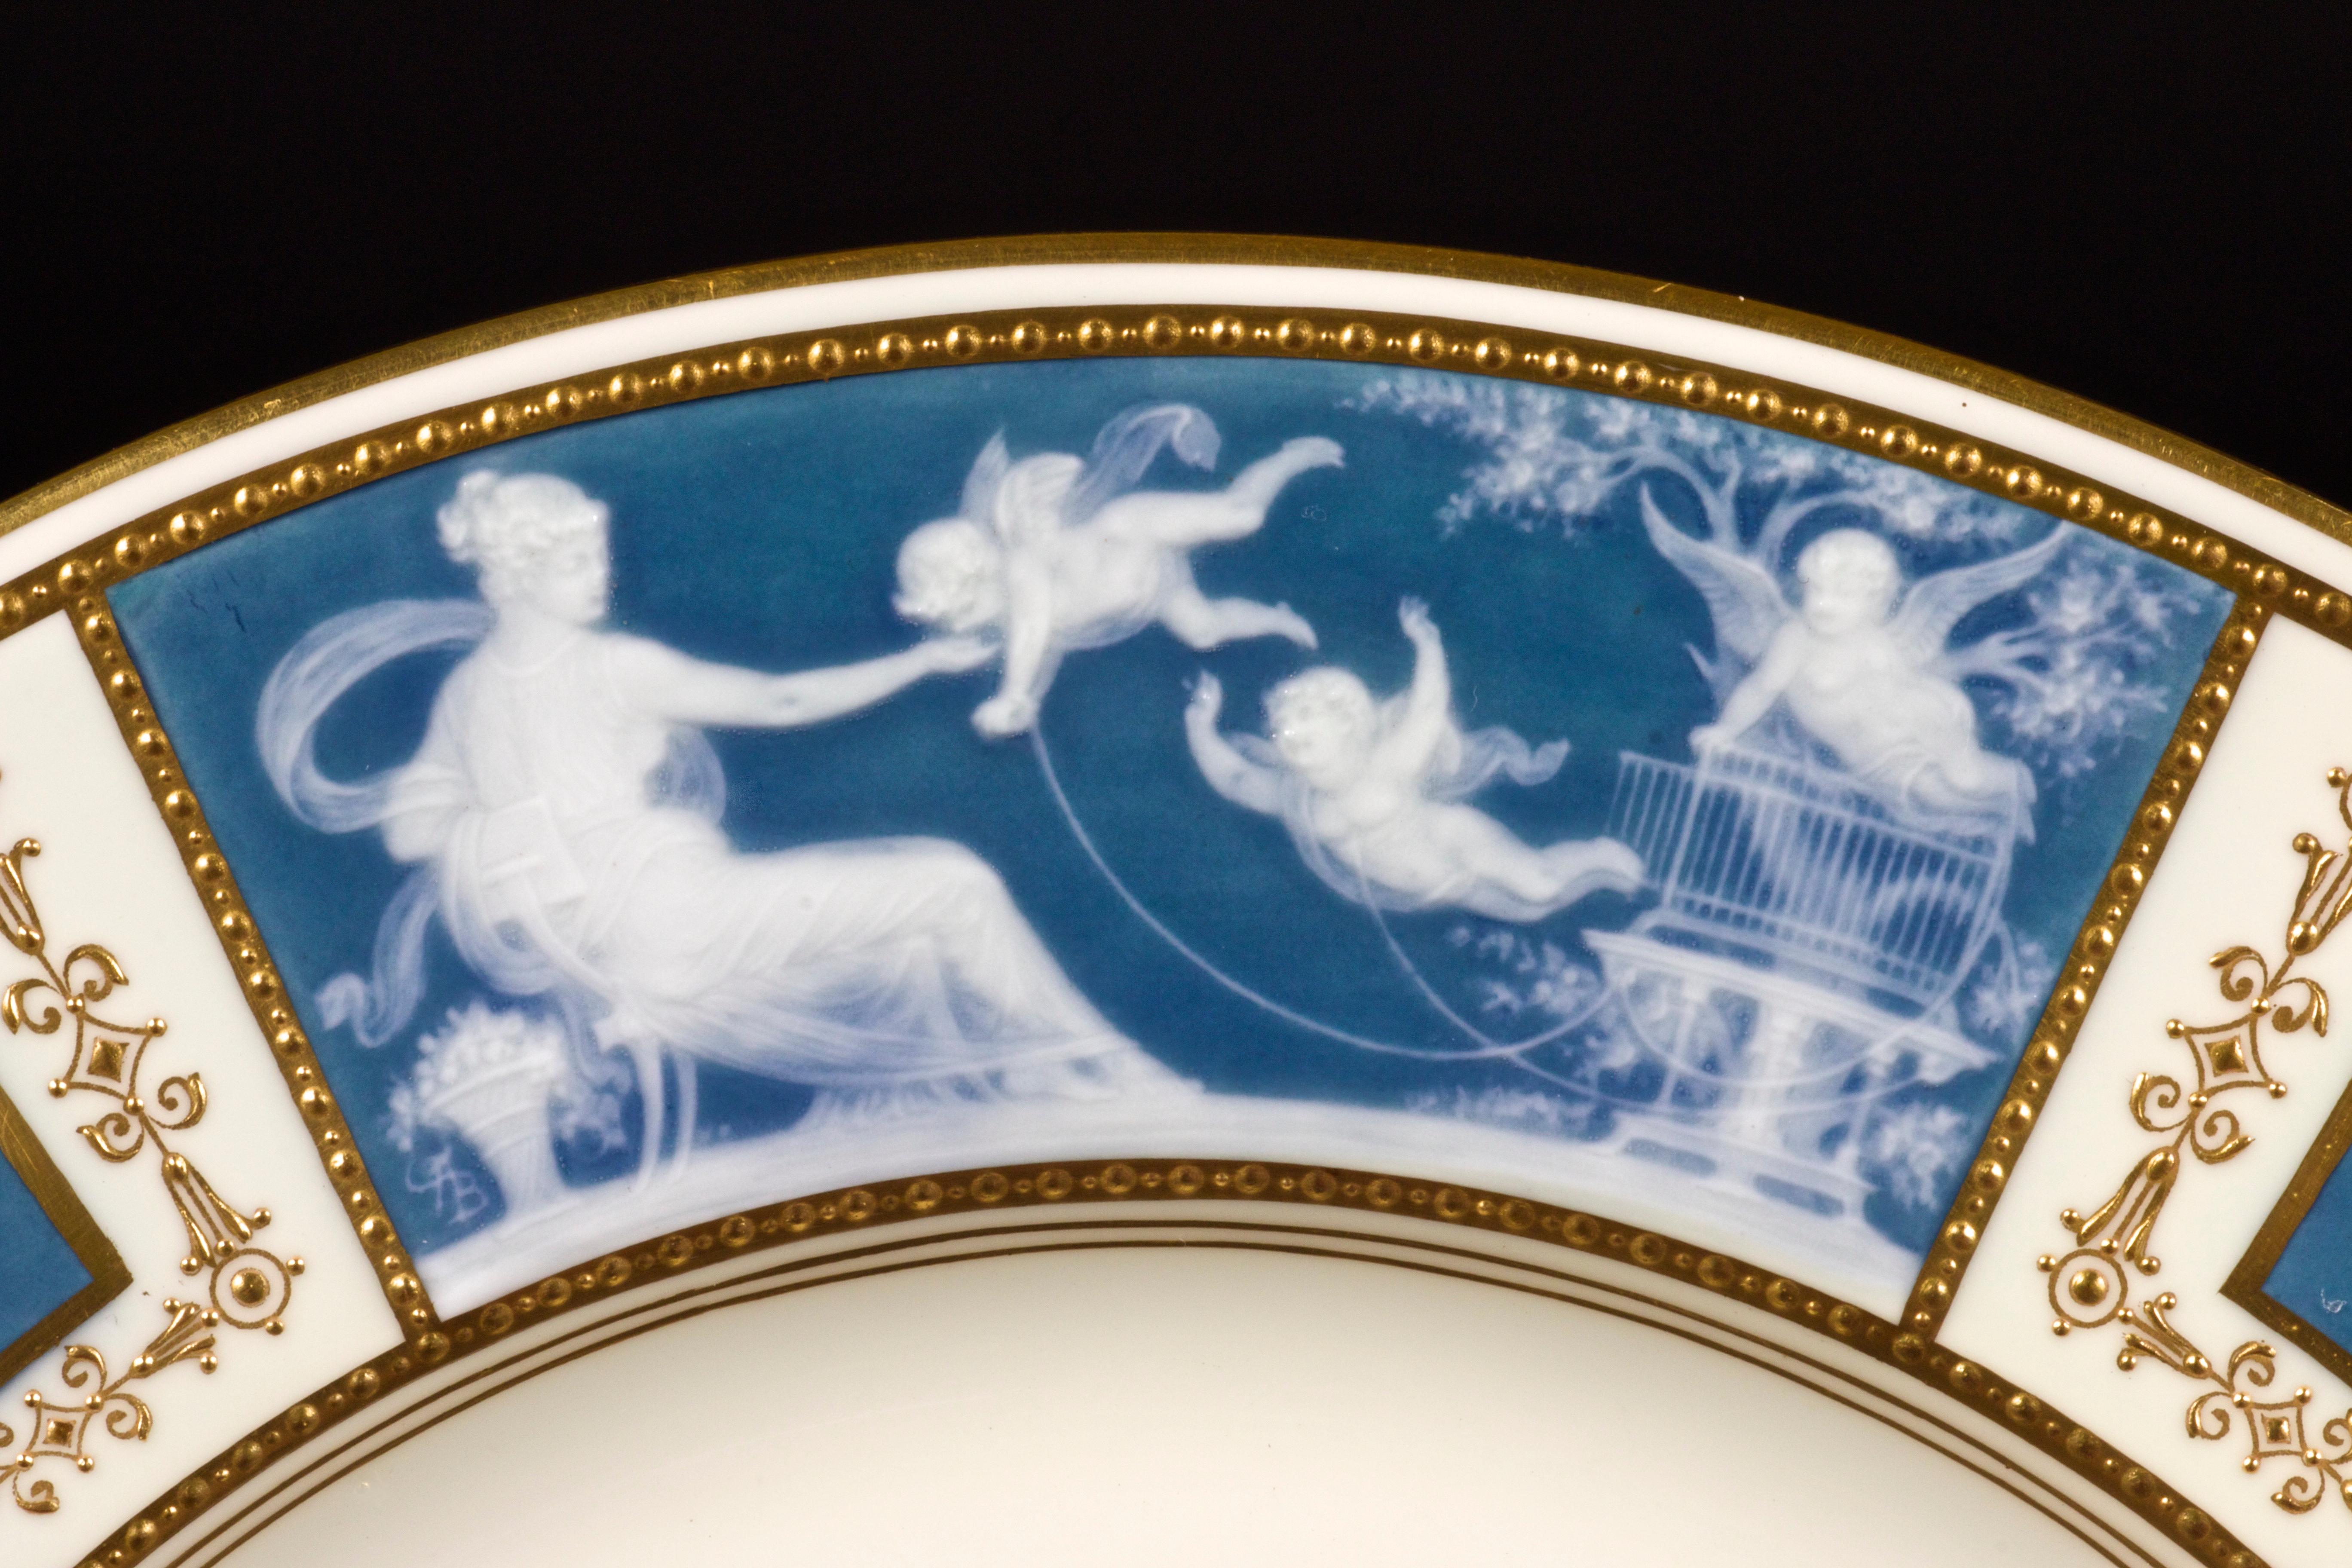 Neoclassical 8 Minton Pate-sur-pate Blue Plates for Tiffany, by Artist Albion Birks